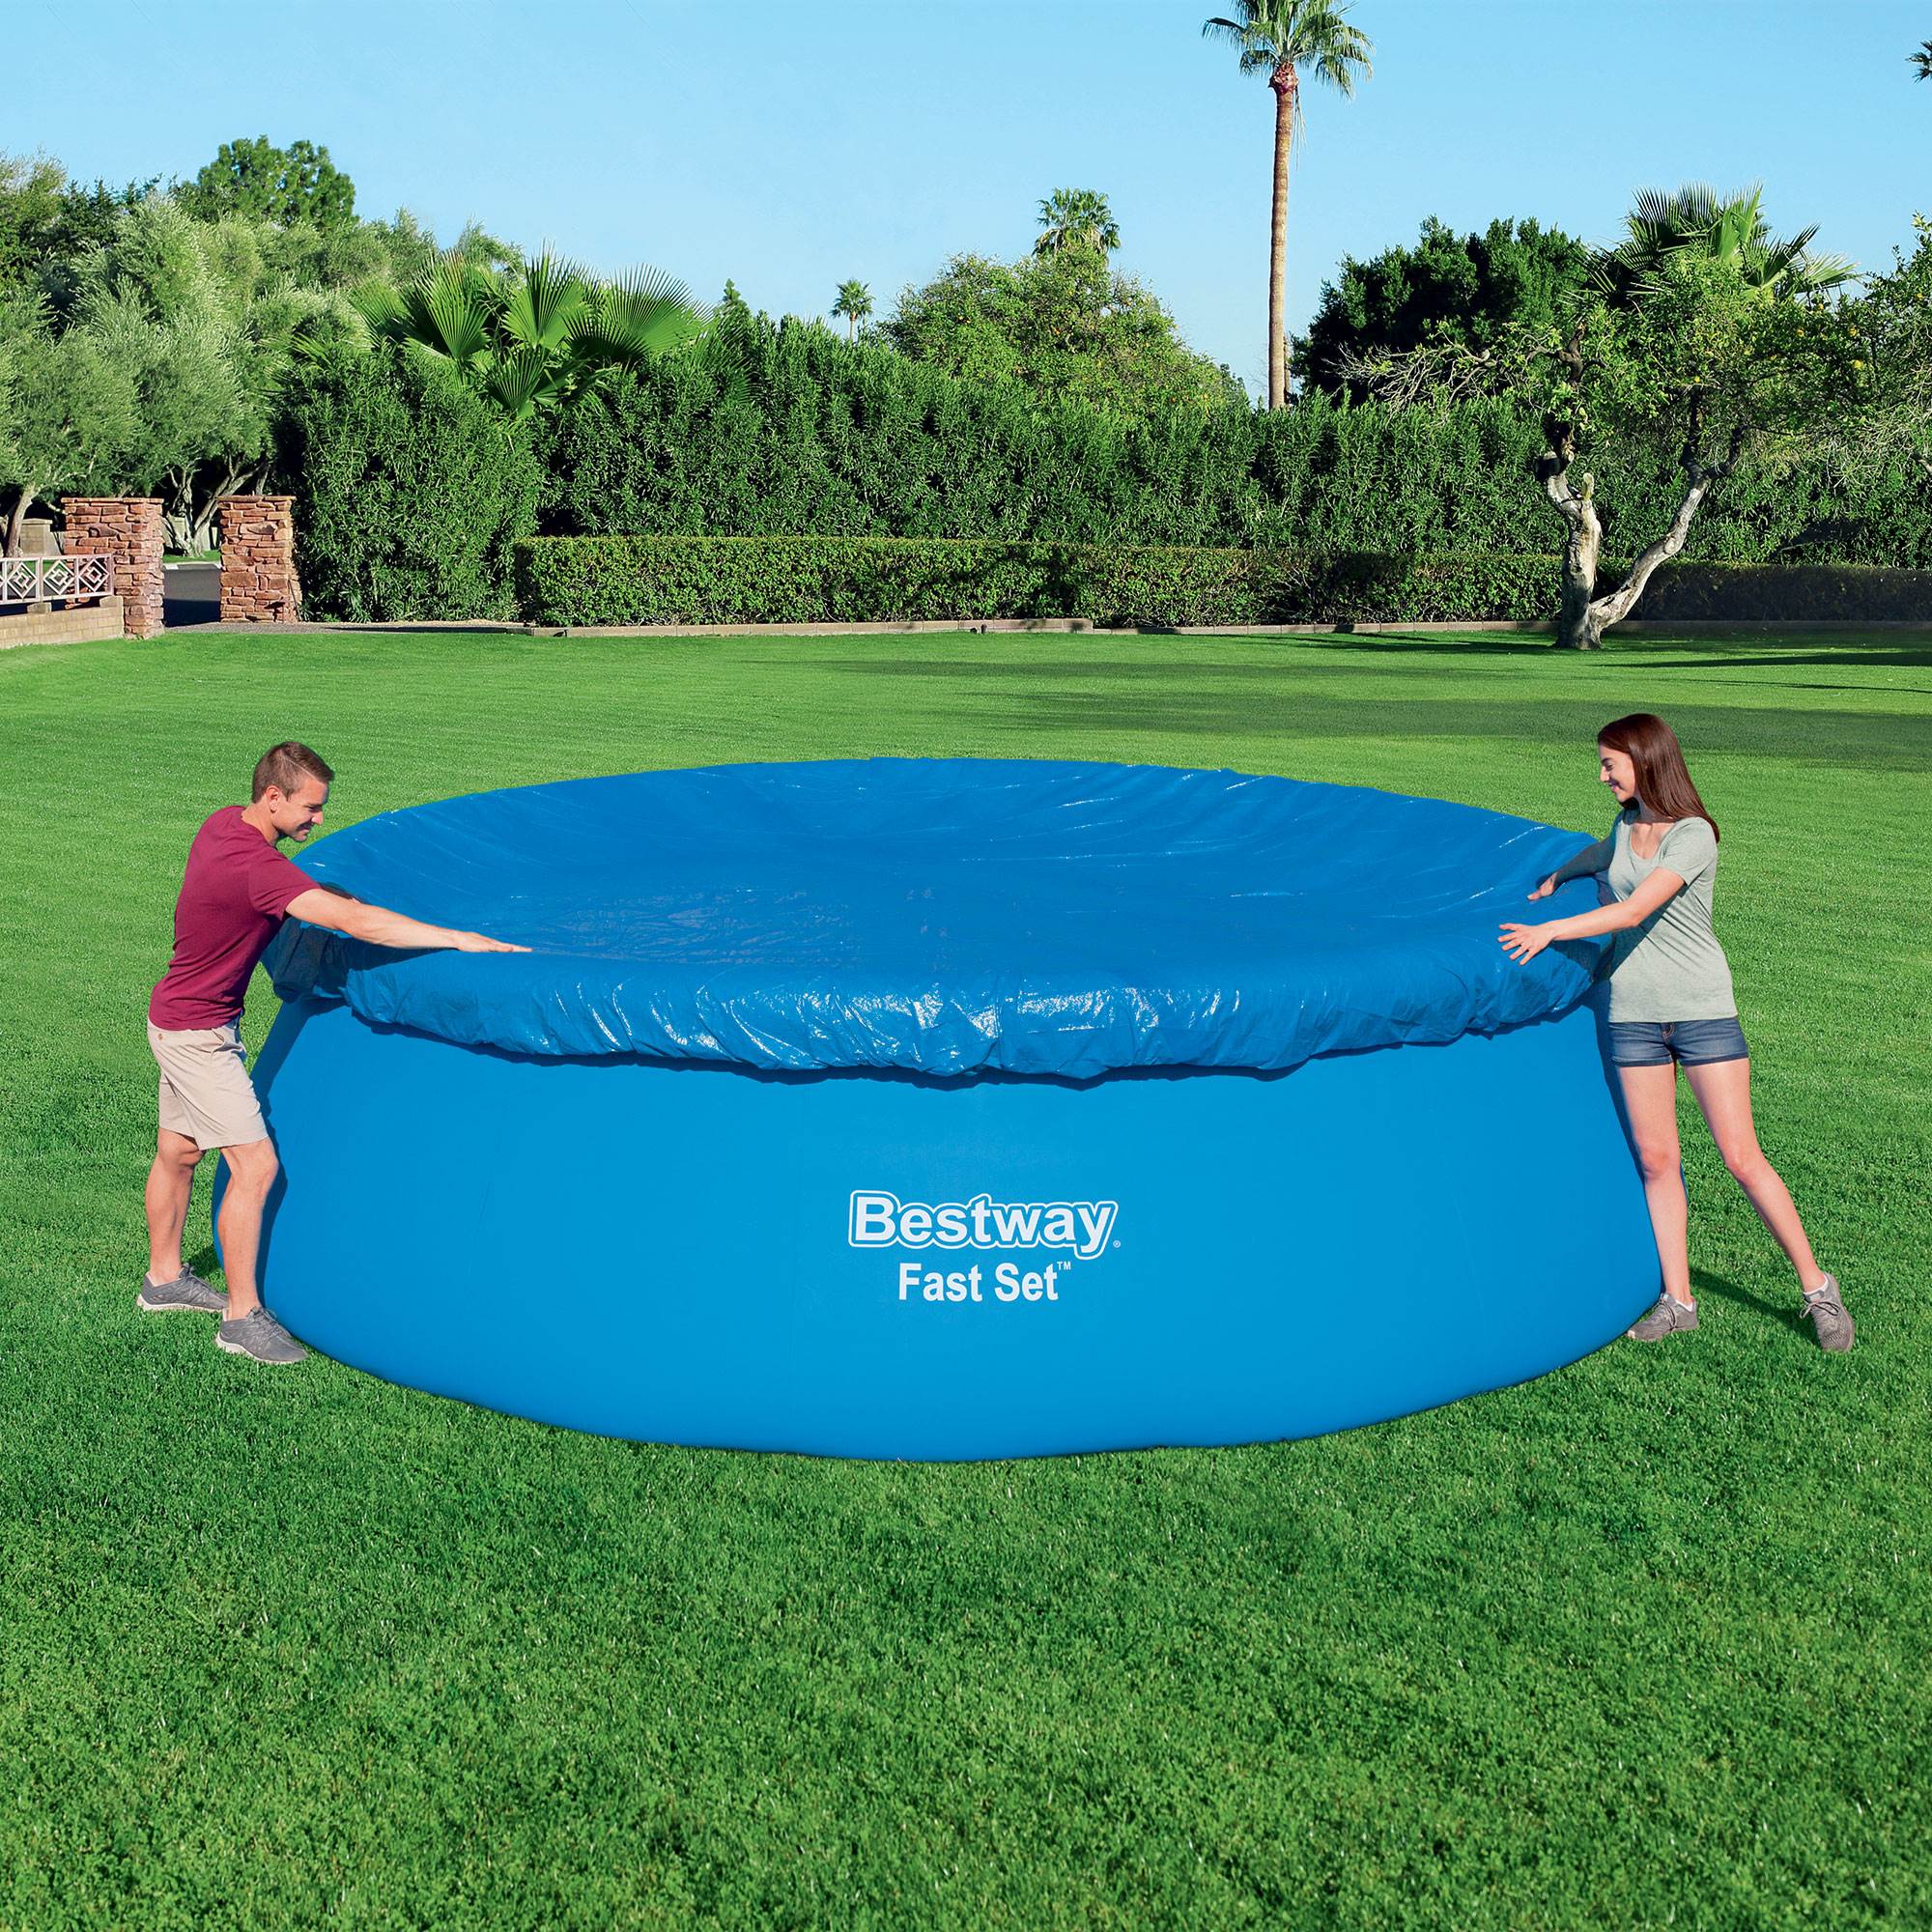 Bestway 58035e Flowclear Fast Set Pool Debris Cover For 15 Foot Round Pools 821808580354 Ebay